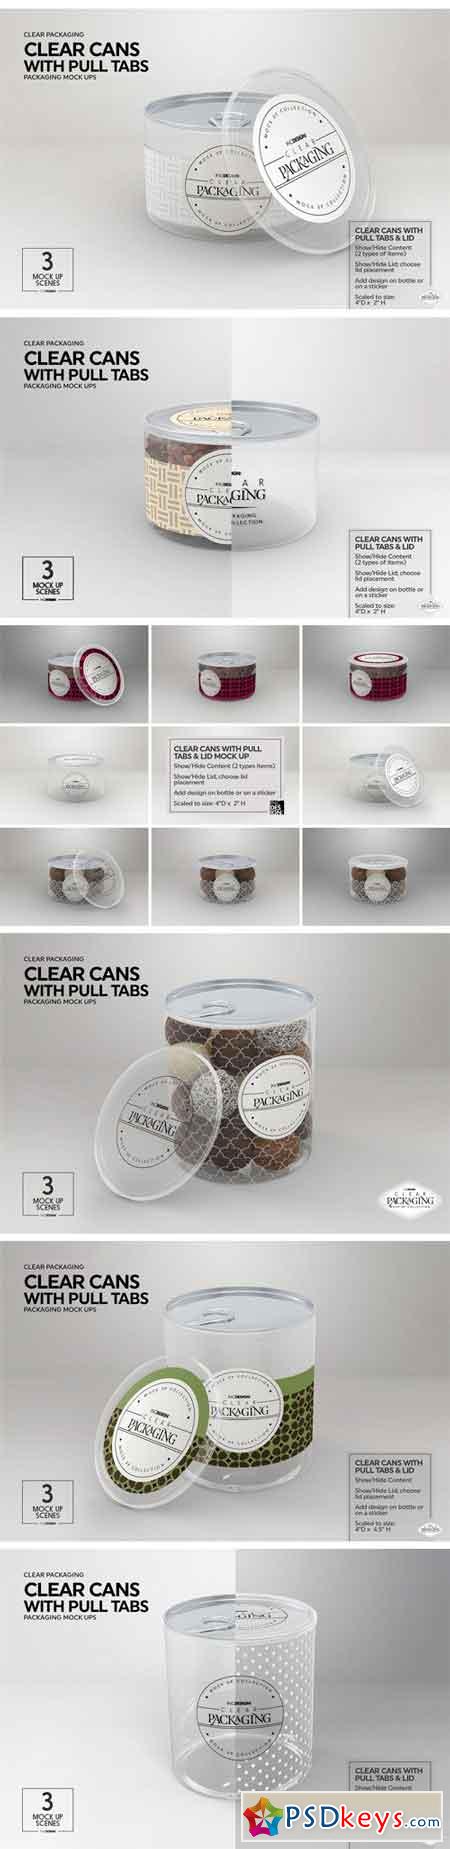 Clear Cans with Pull Tabs Mock Up 2218686